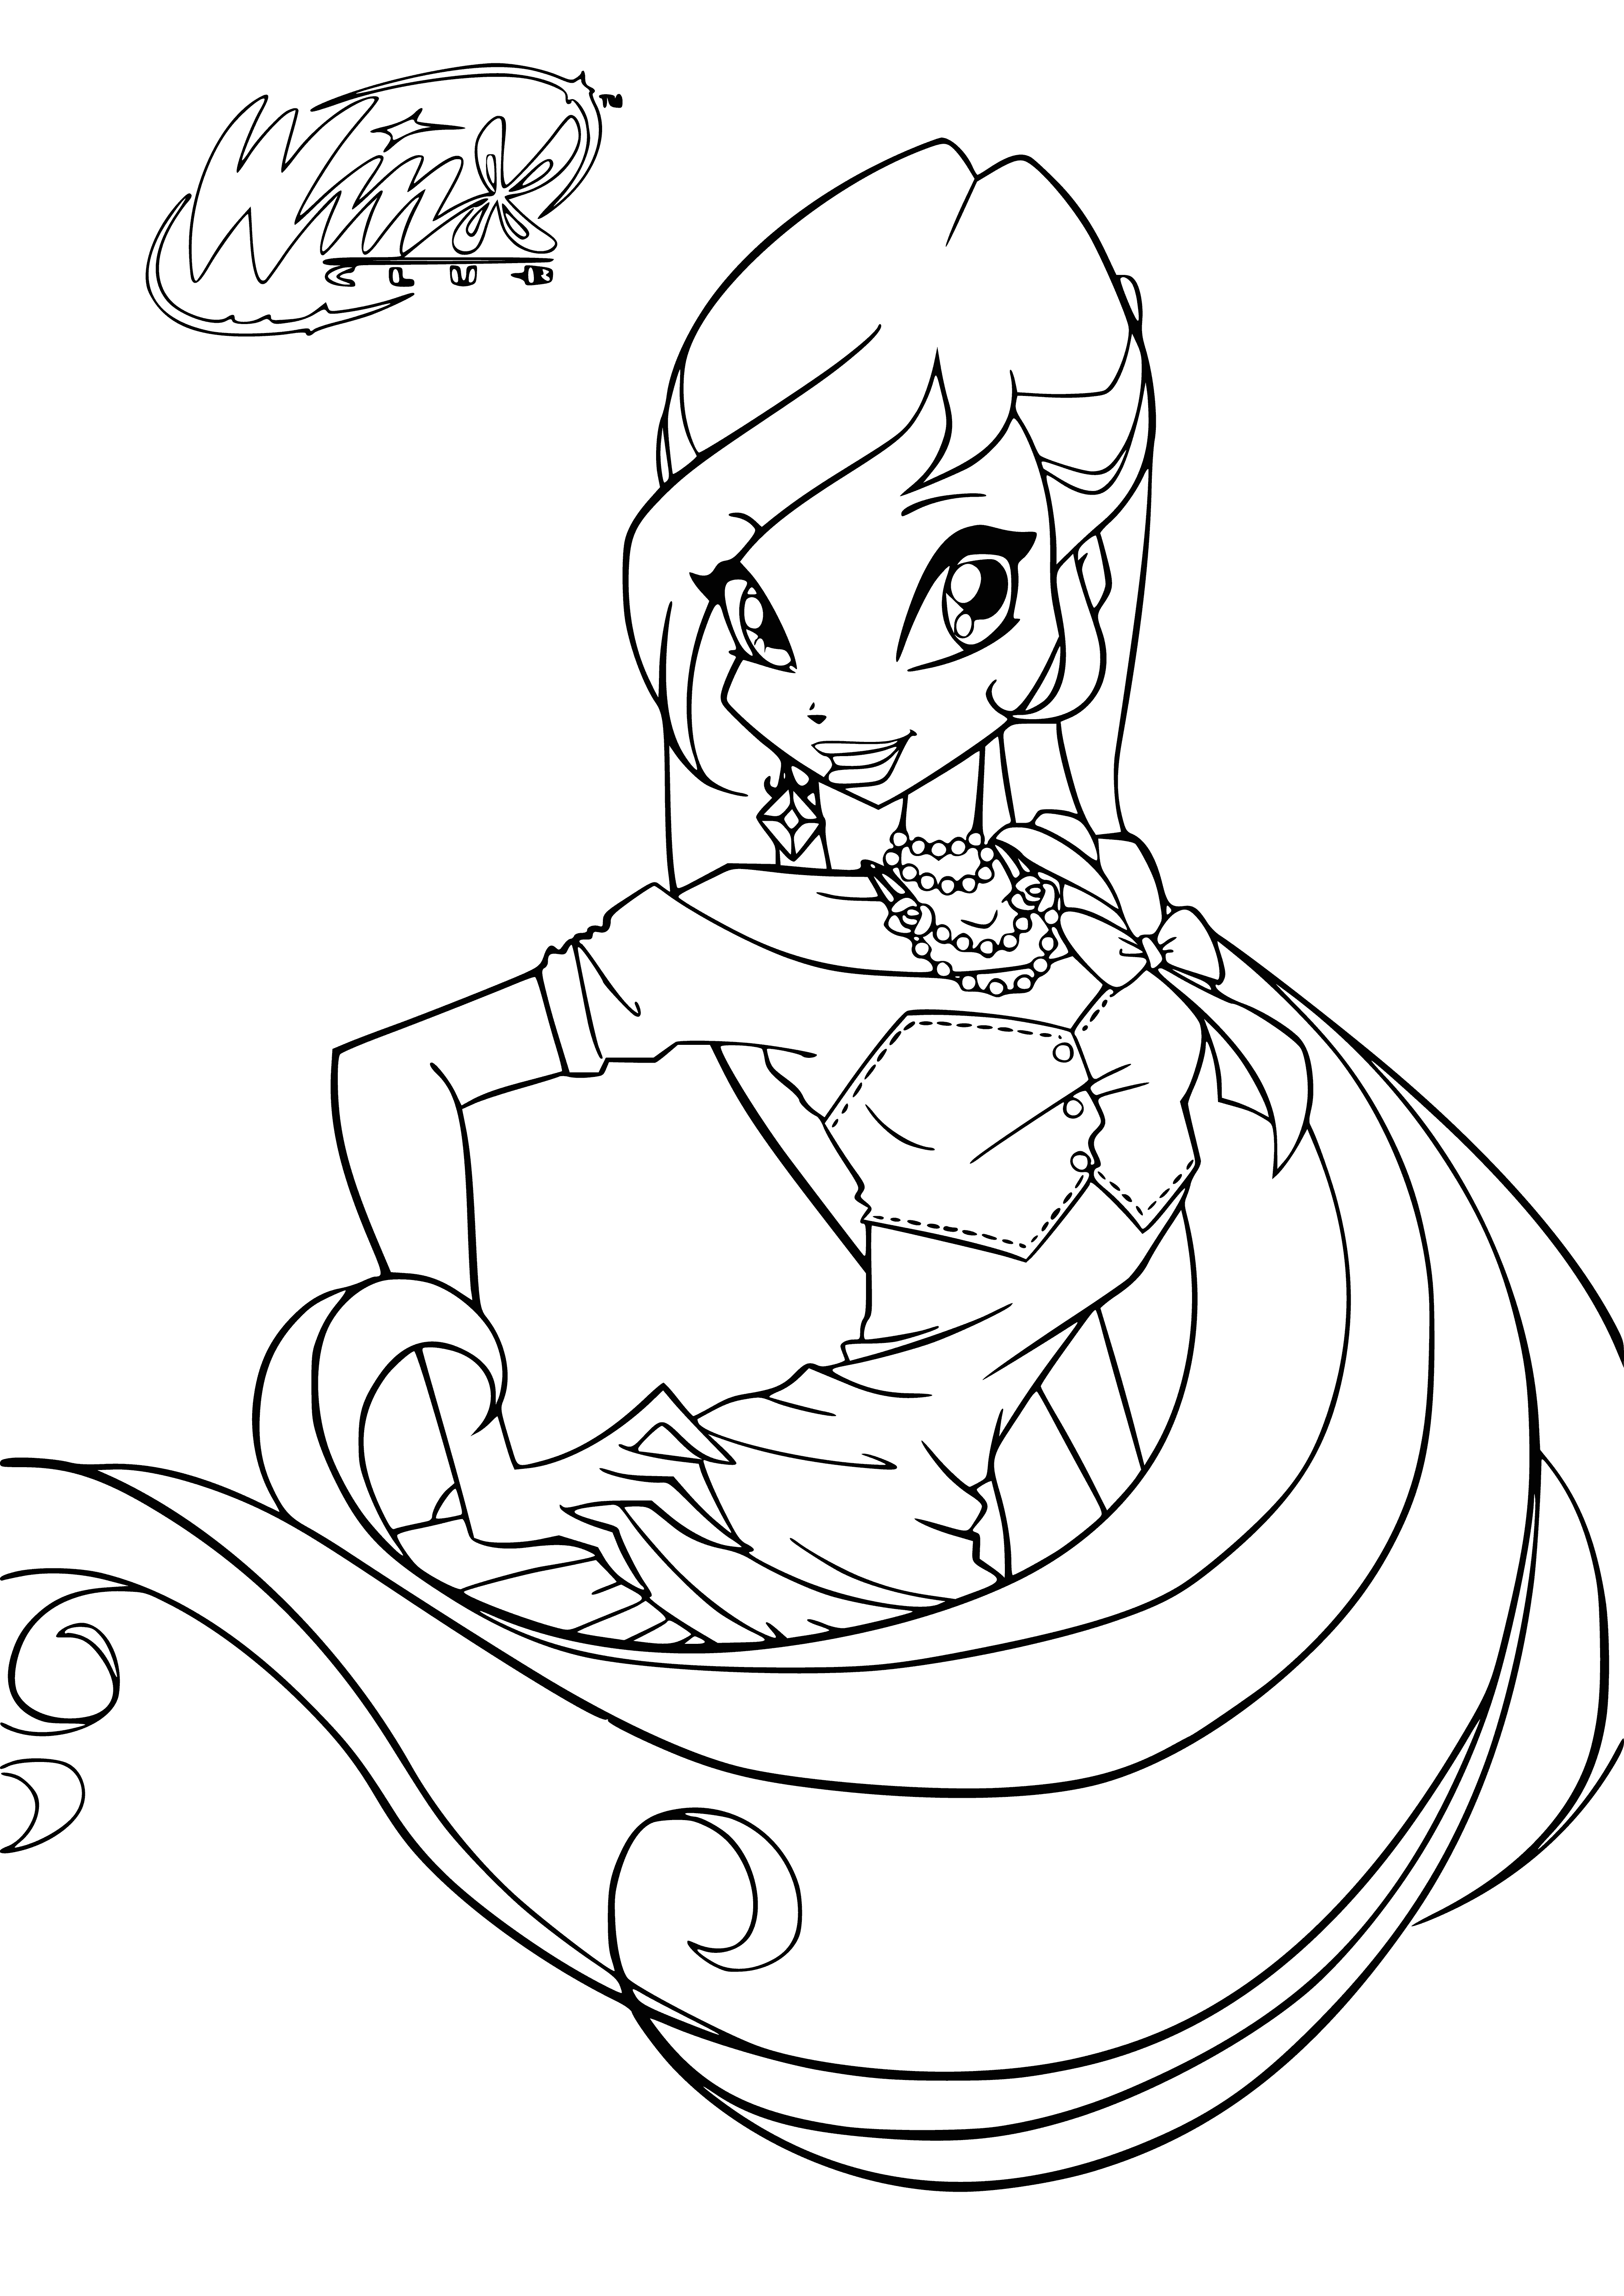 coloring page: Woman in coloring page holds staff, outstretched hand, long purple hair, serious face, wearing purple robe.